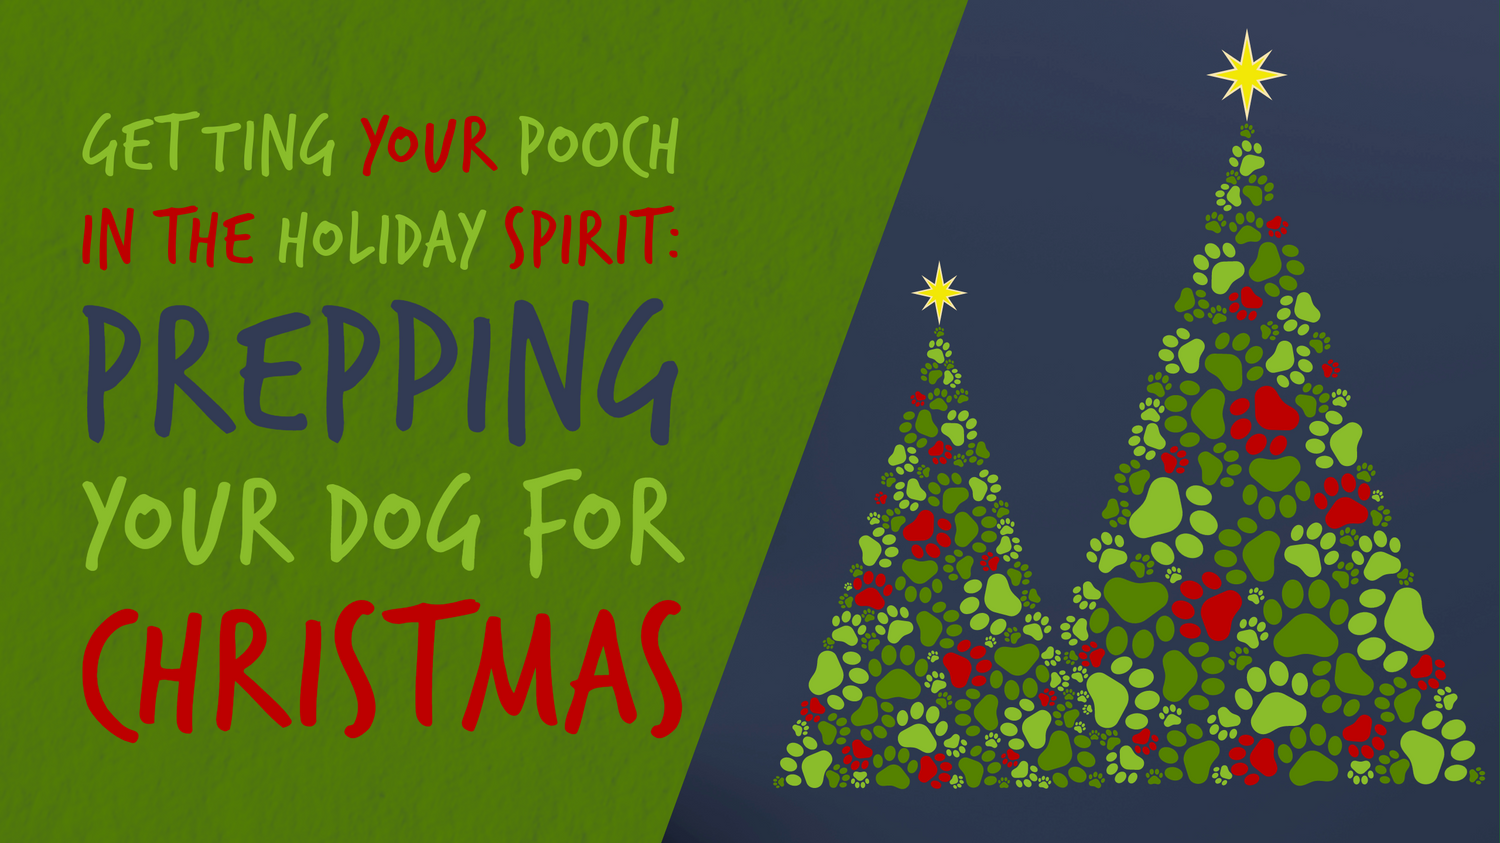 Two Christmas trees and a box with text “Getting Your Pooch in the Holiday Spirit: Prepping Your Dog for Christmas”